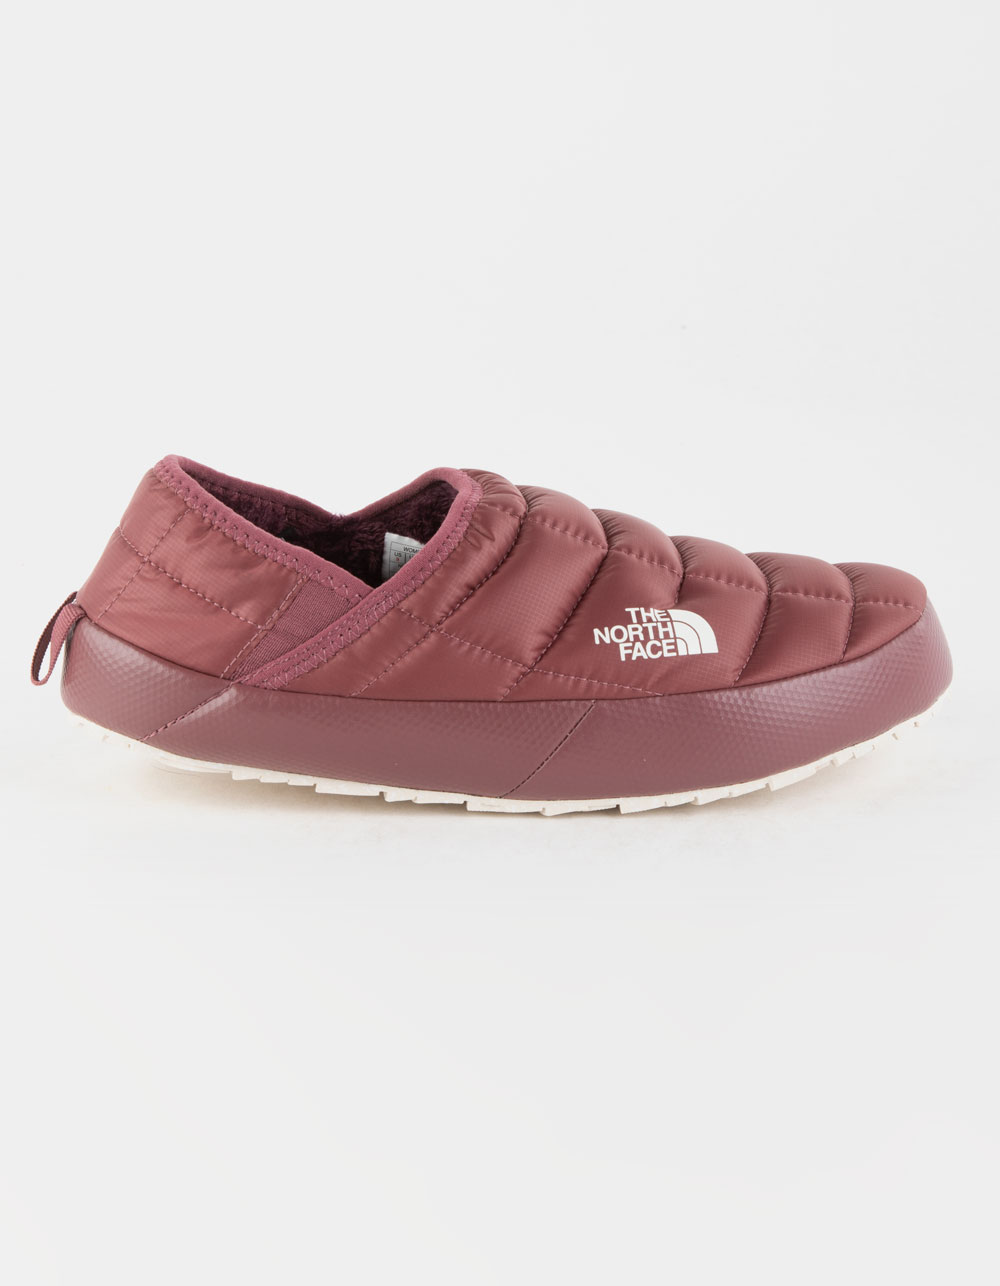 THE NORTH FACE Thermoball Traction Womens Slippers - PINK | Tillys